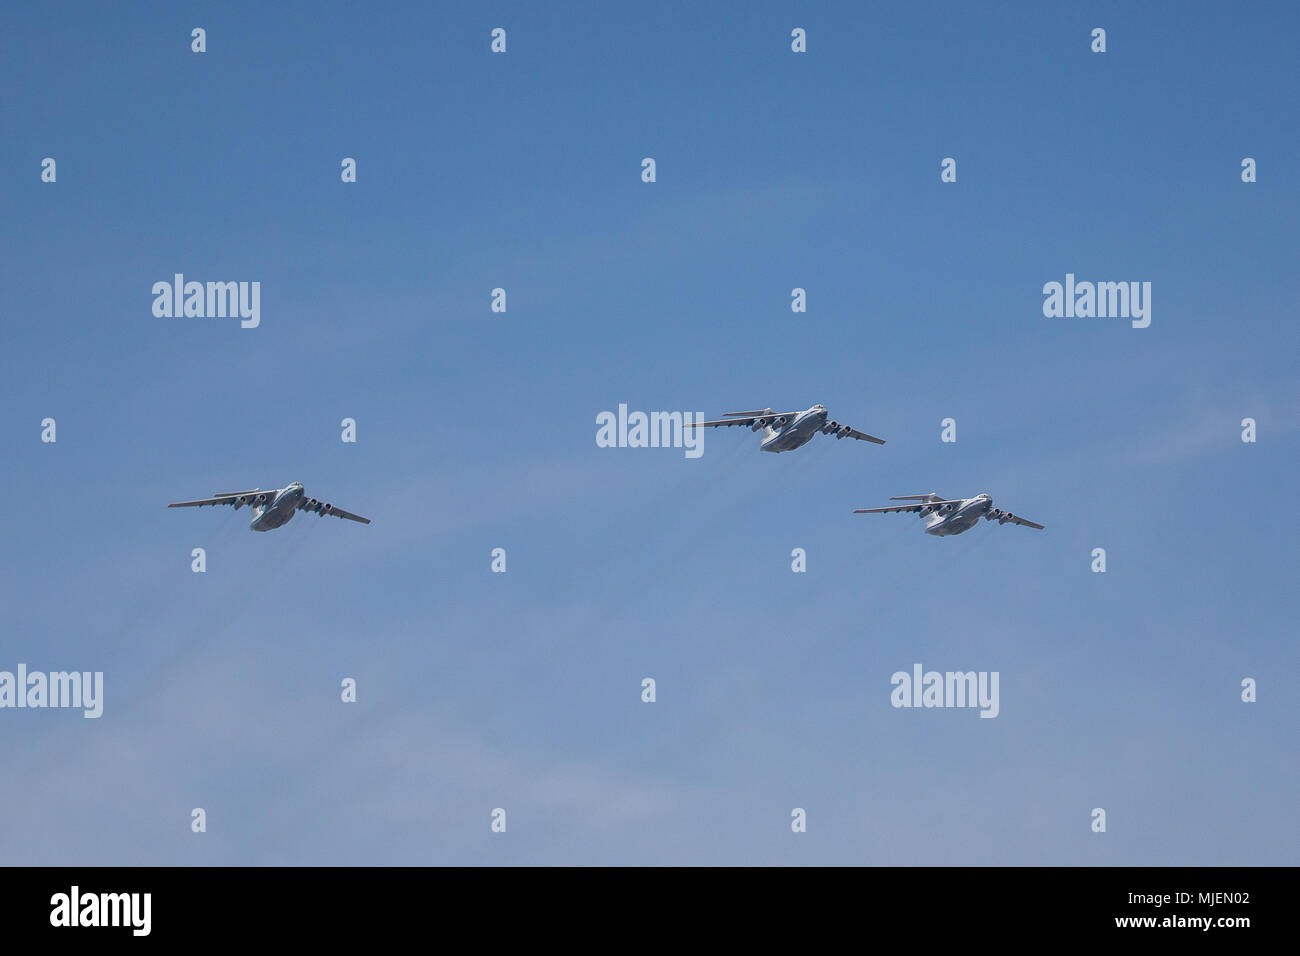 Moscow, Russia. 4th May, 2018. Russian Air Force Il-76 military transport aircraft fly in formation during a rehearsal of the upcoming Victory Day air show marking the 73rd anniversary of the victory over Nazi Germany in the 1941-45 Great Patriotic War, the Eastern Front of World War II. Credit: Victor Vytolskiy/Alamy Live News Stock Photo